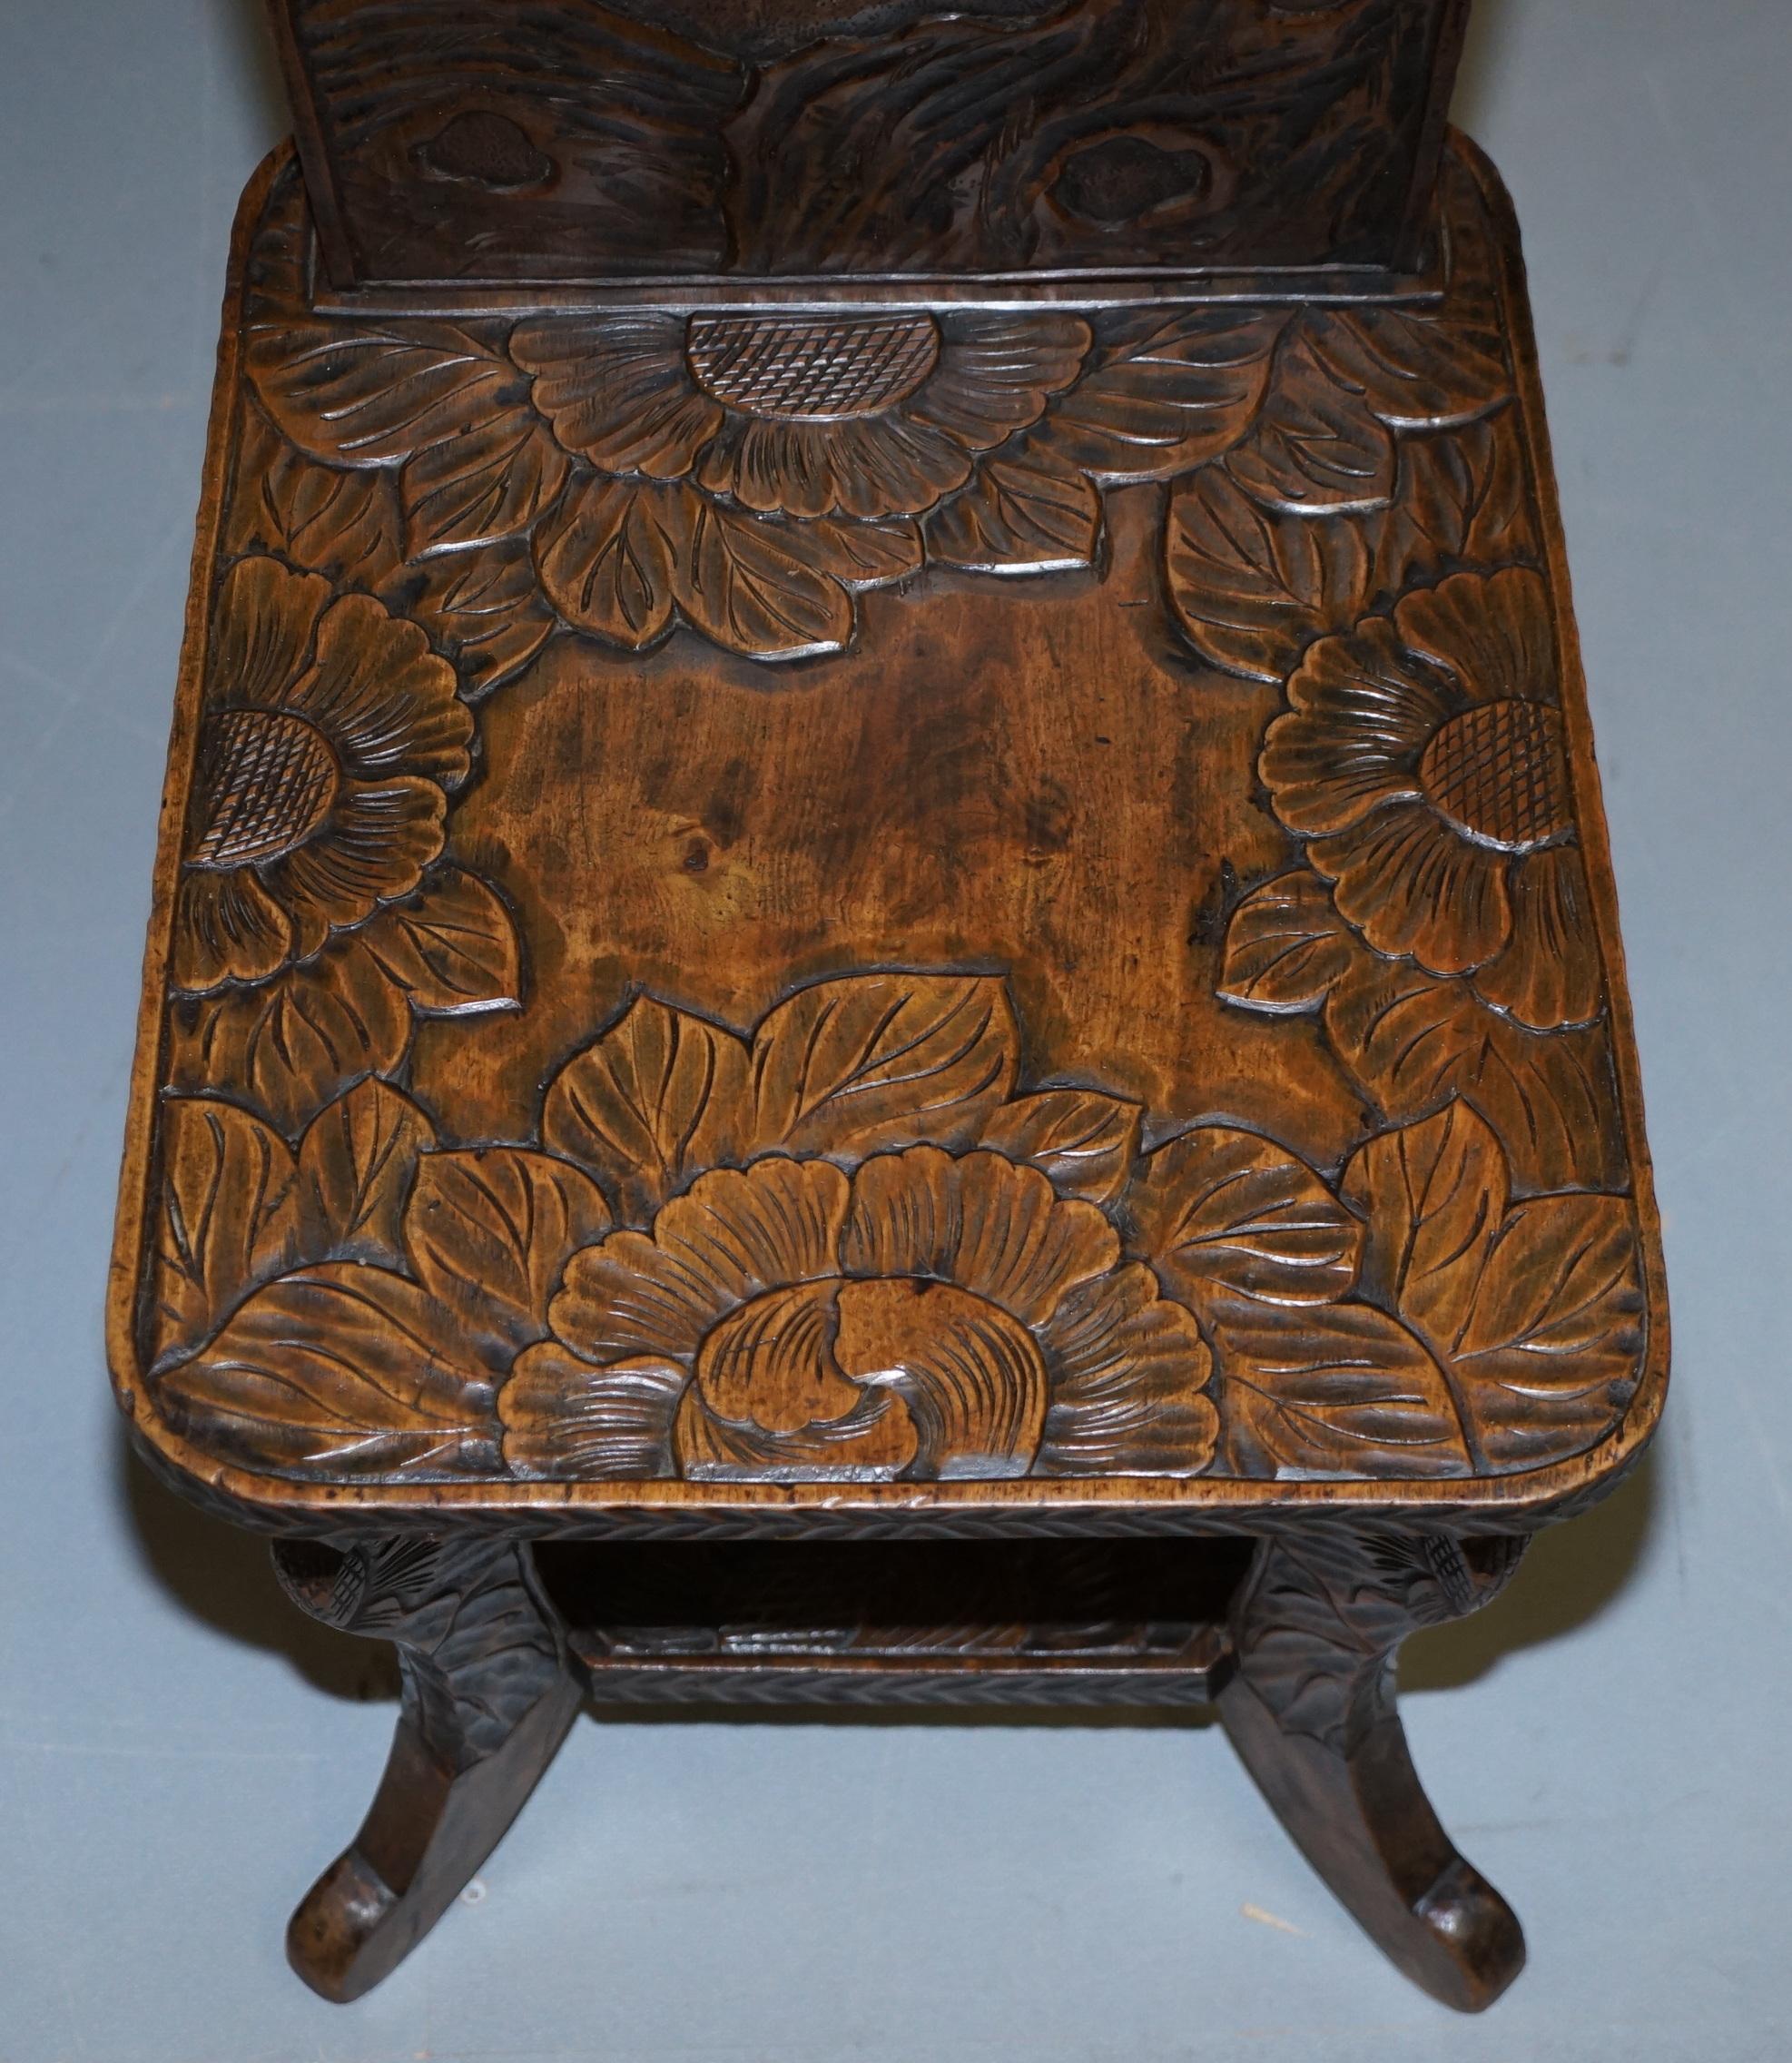 Hand-Crafted Very Rare Original Liberty's London Signed Qing Dynasty Chair Floral Carving For Sale